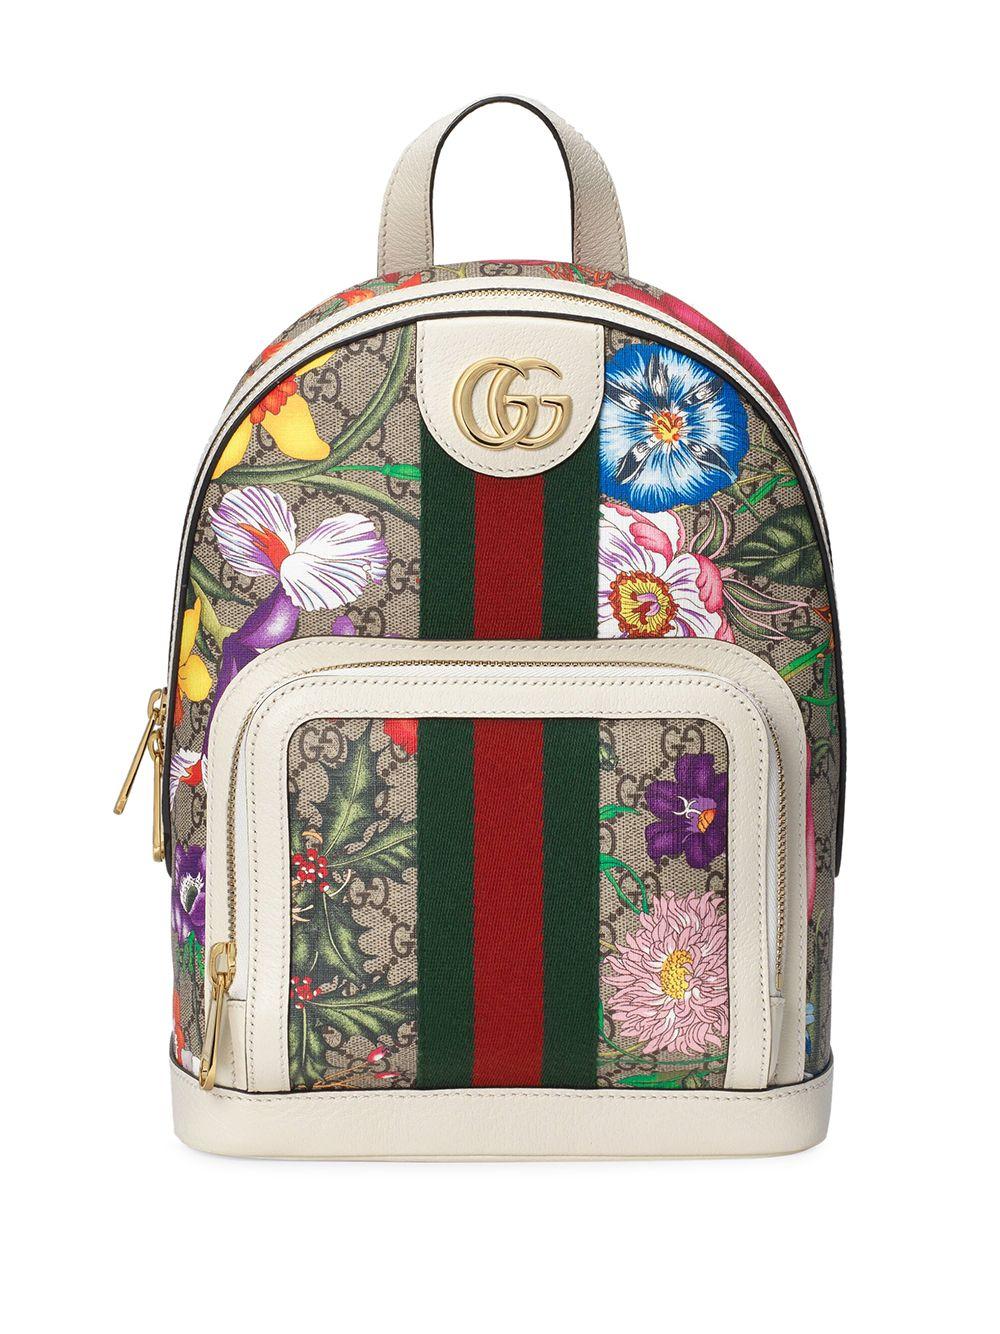 Gucci Leather Flora Print Monogram Backpack - Lyst